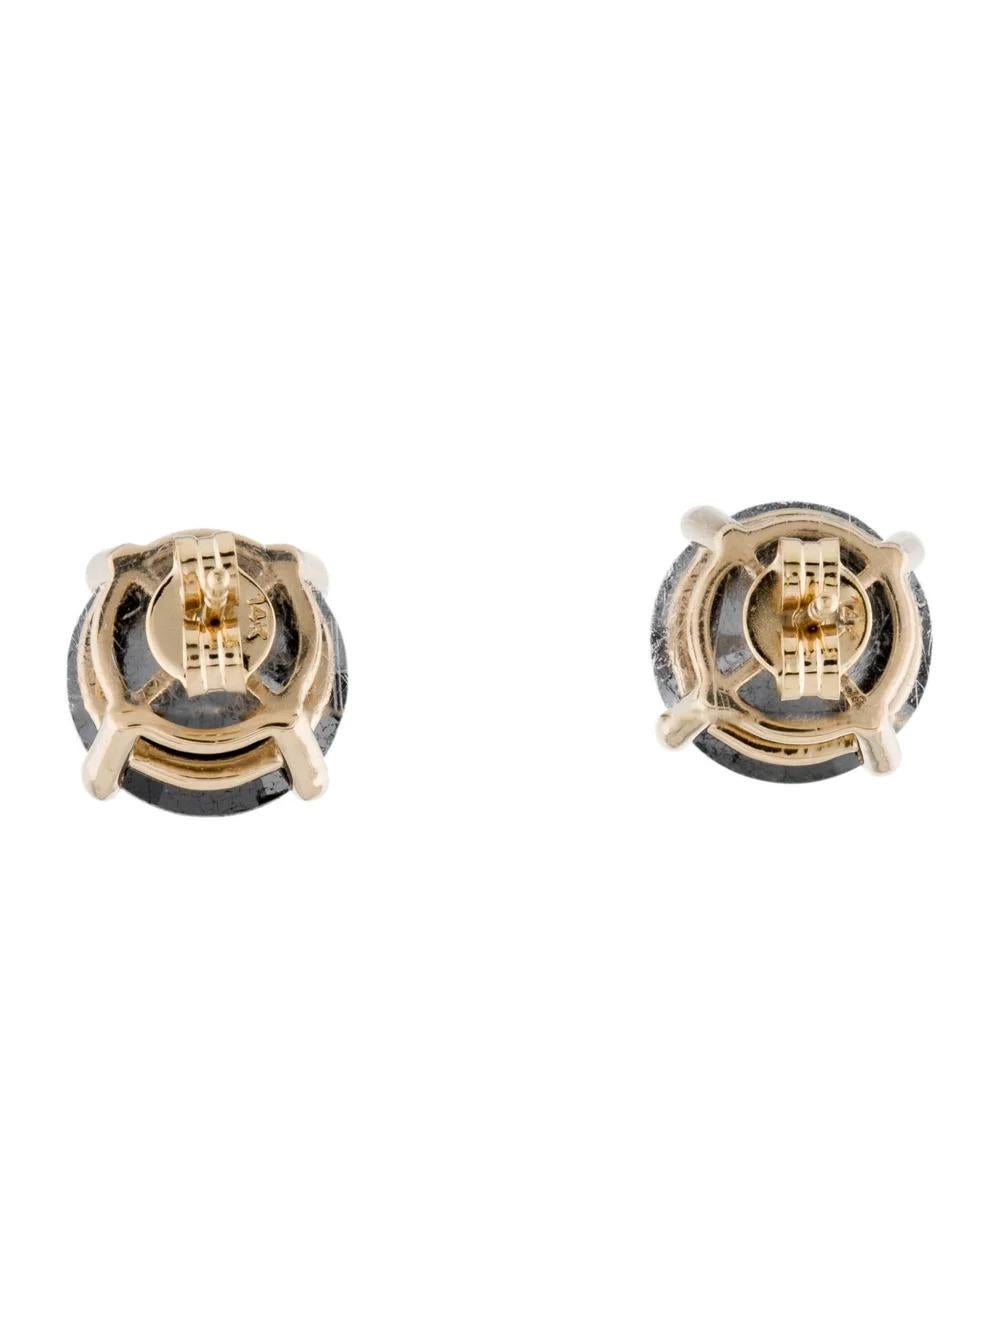 14K Diamond Stud Earrings 12.42ctw - Timeless Elegance, Sparkling Brilliance In New Condition For Sale In Holtsville, NY